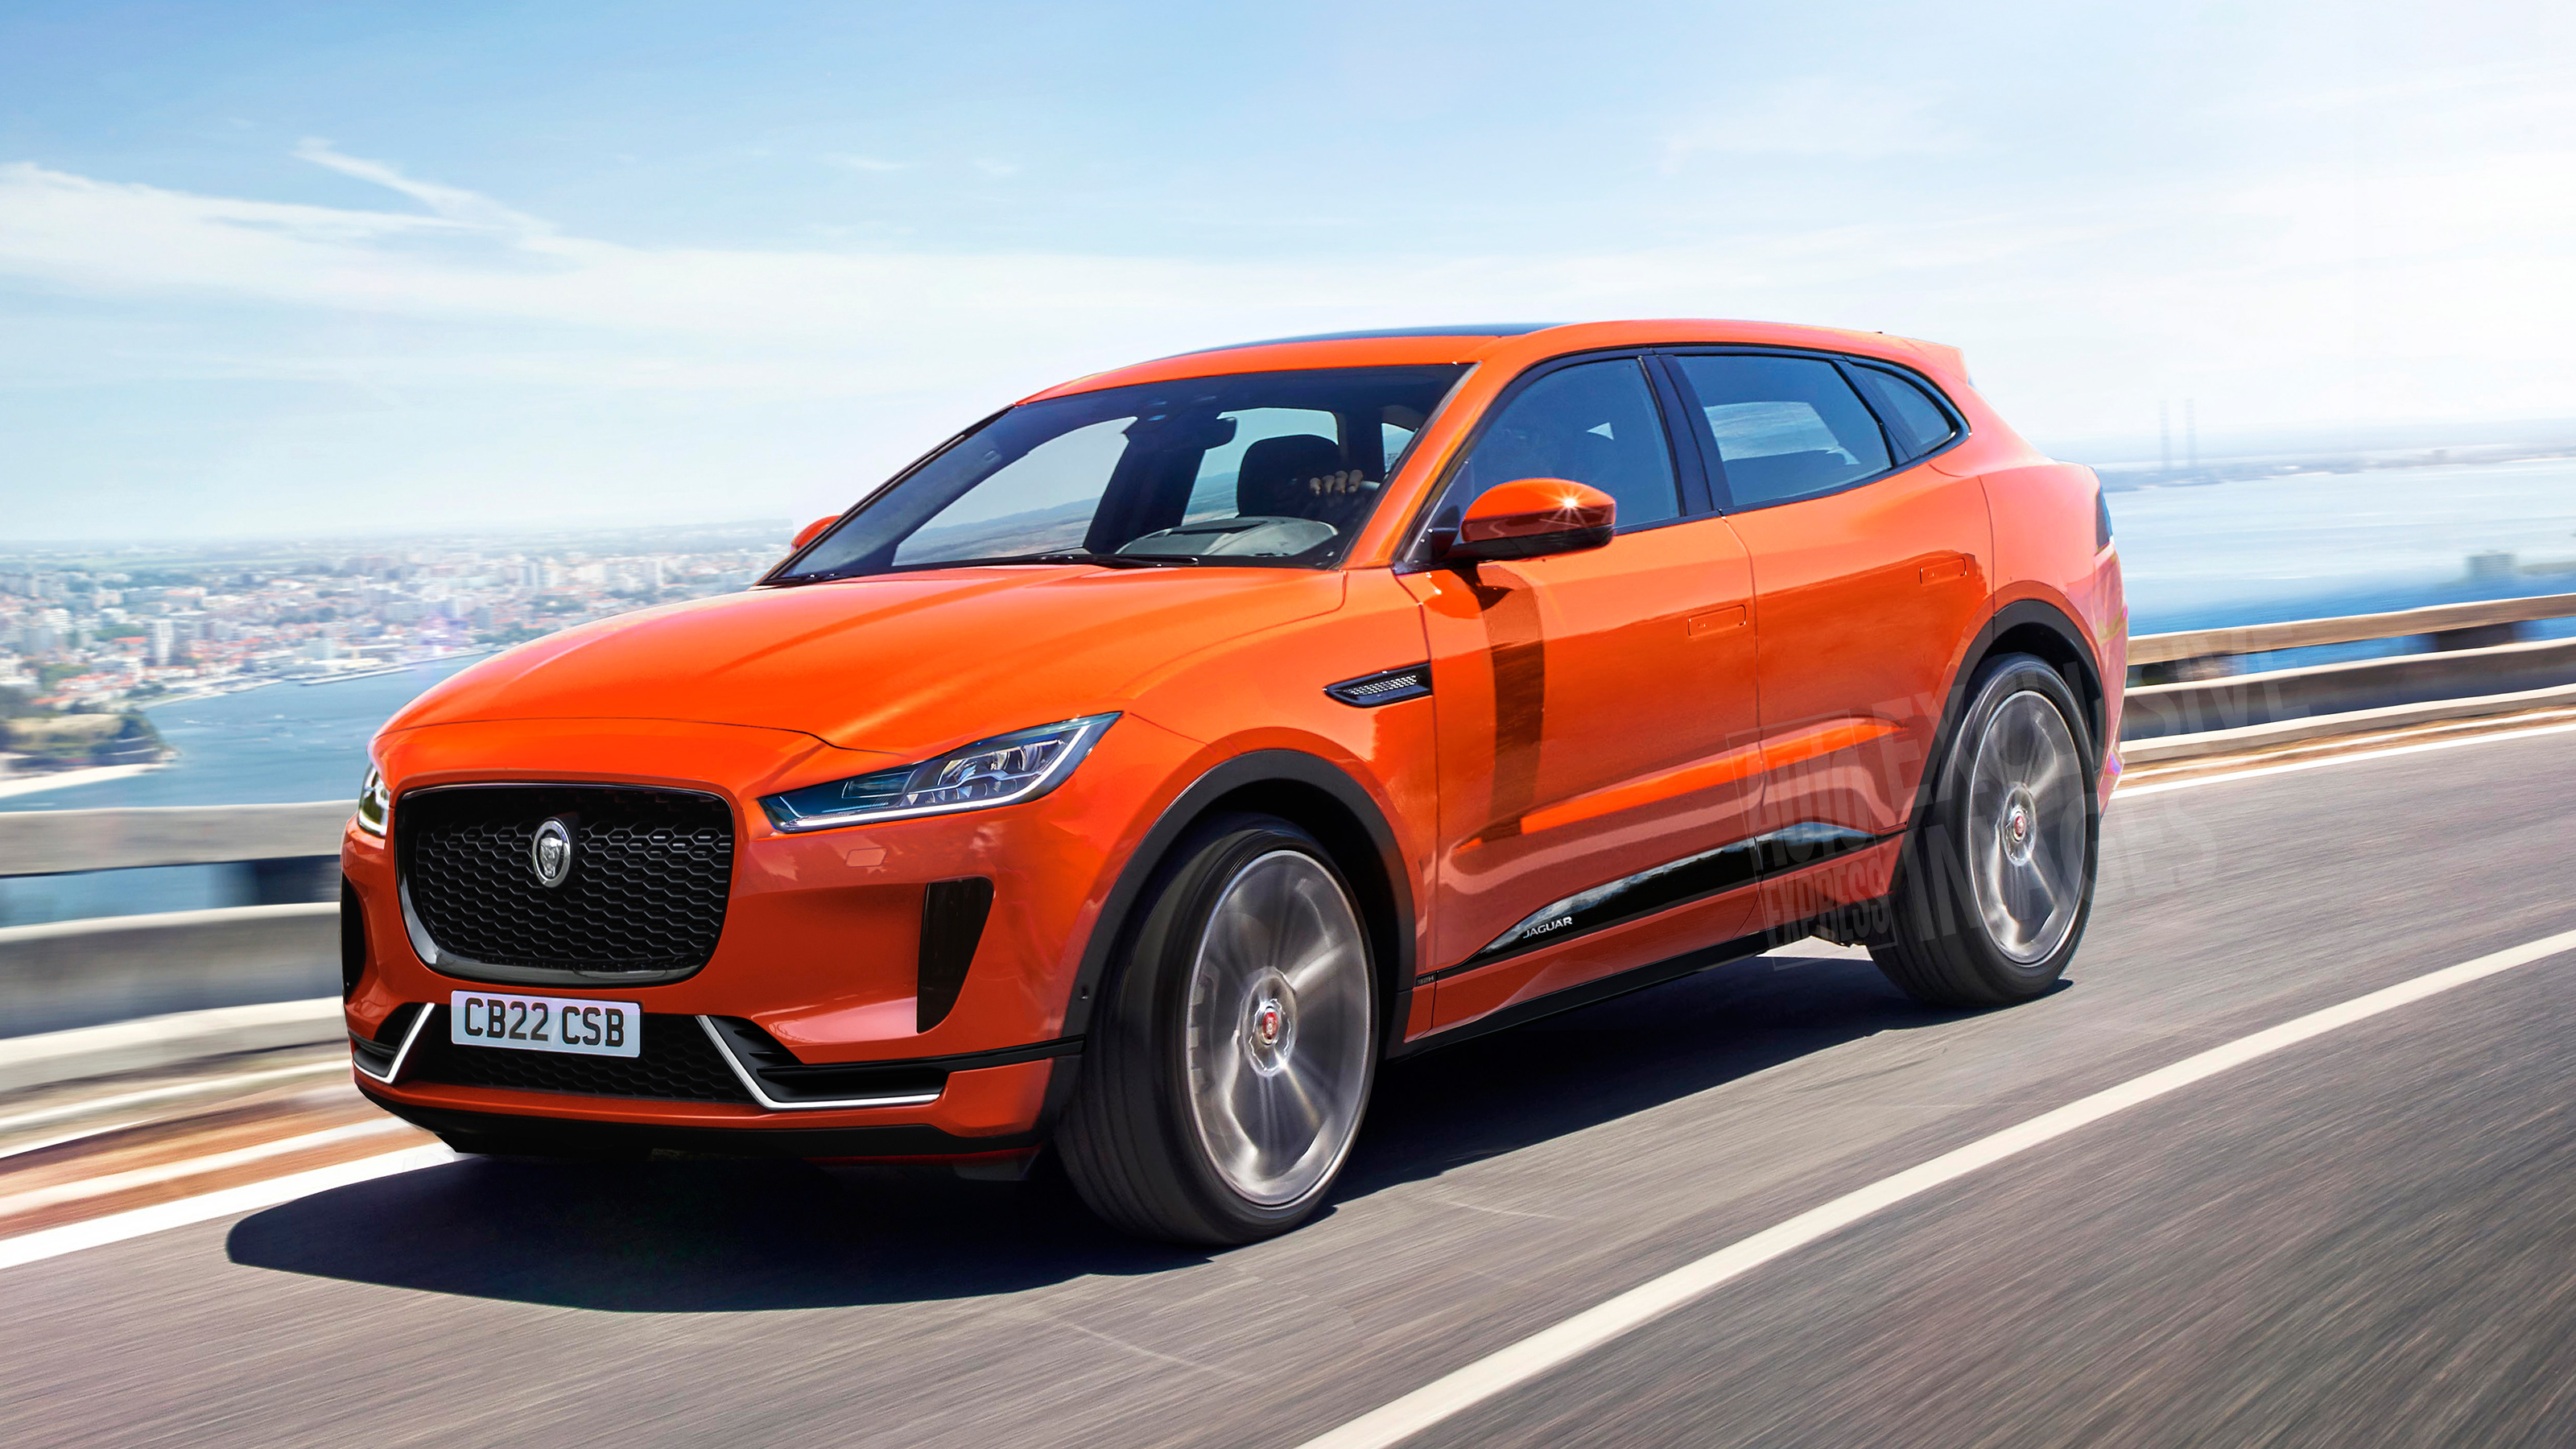 New Jaguar JPace electric SUV to tackle Tesla Model X Auto Express